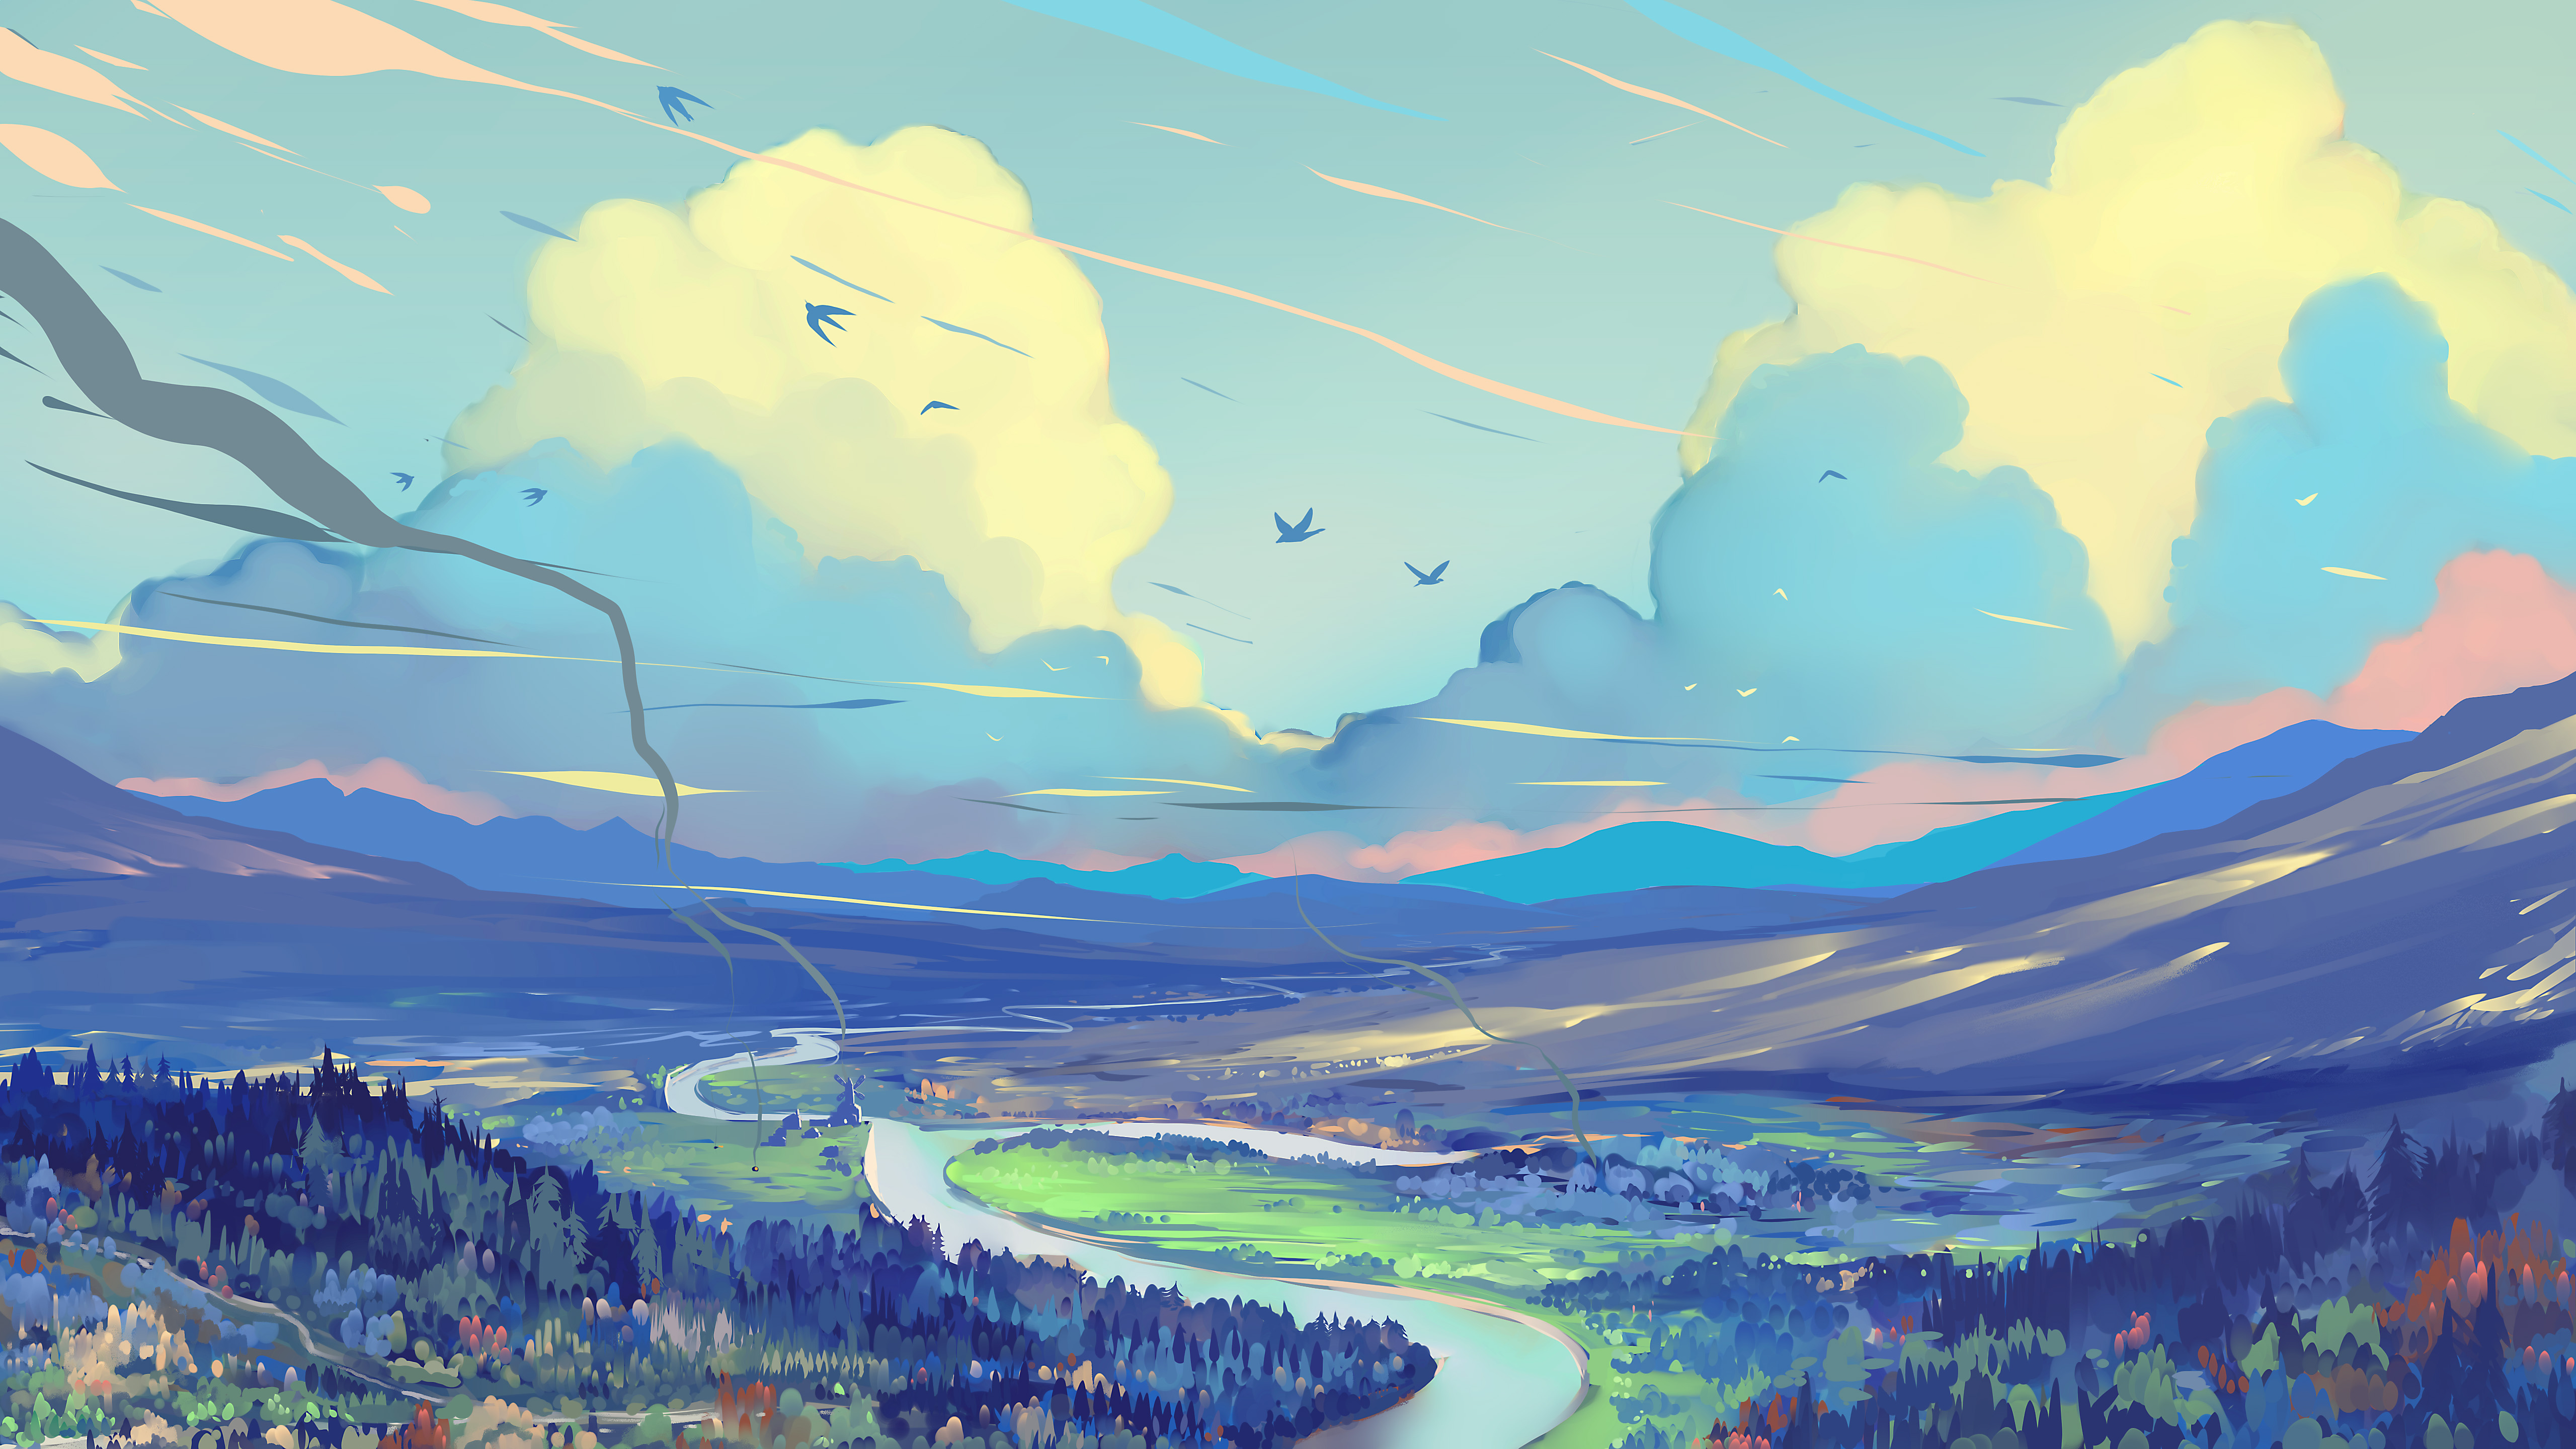 Painting Clouds Sky Landscape River Trees Mountains Birds Digital Art Drawing Hangmoon Artwork 5120x2880